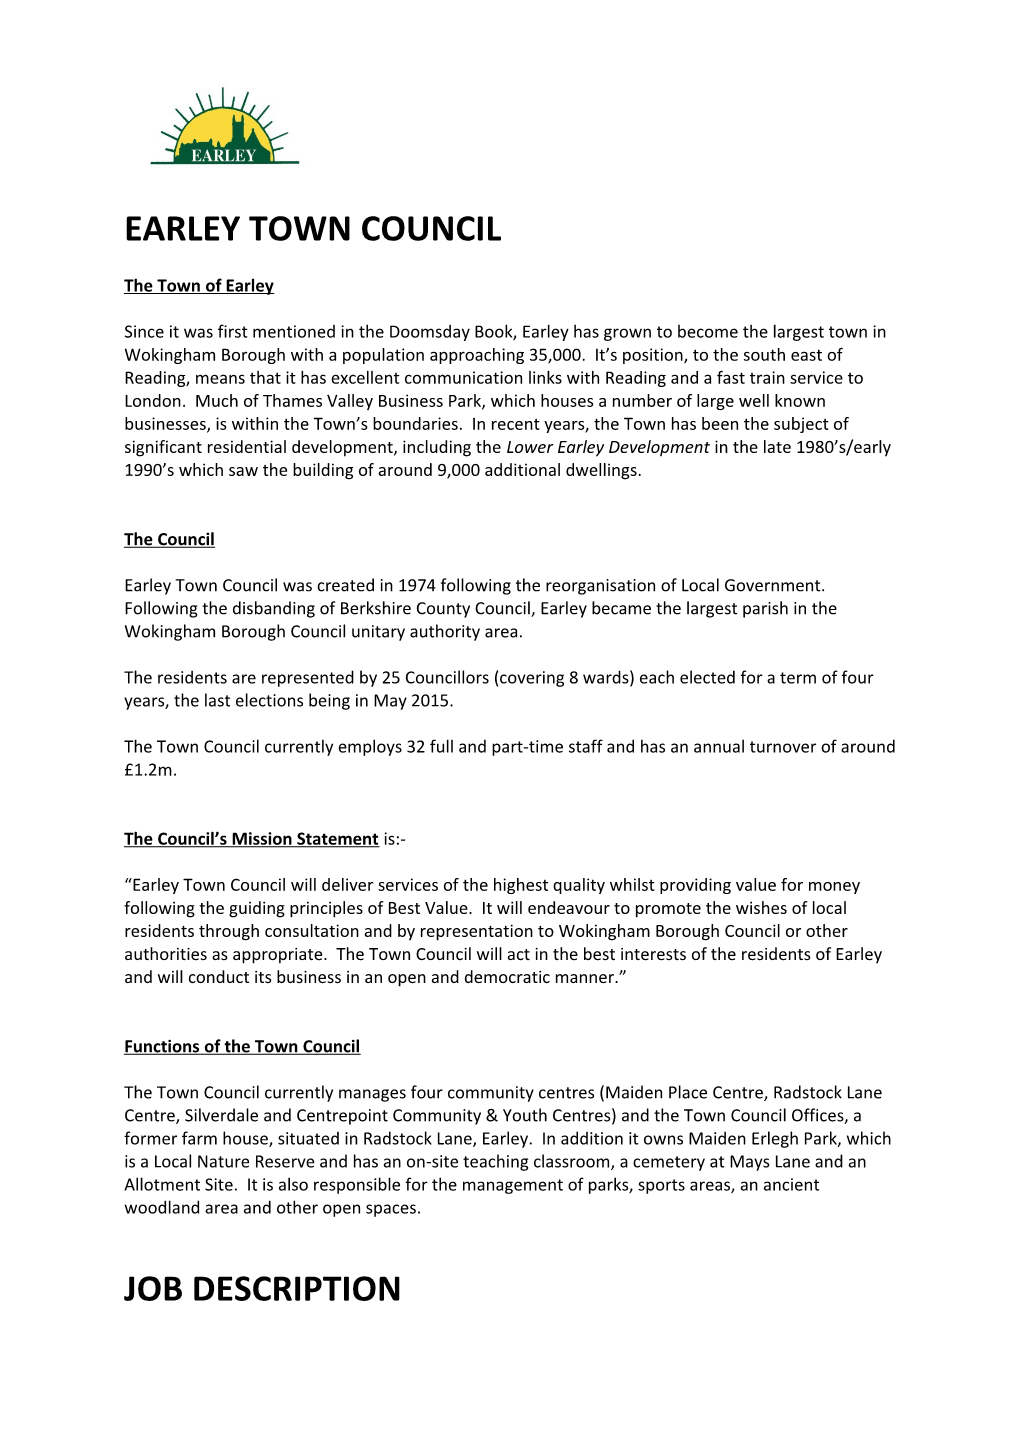 Earley Town Council